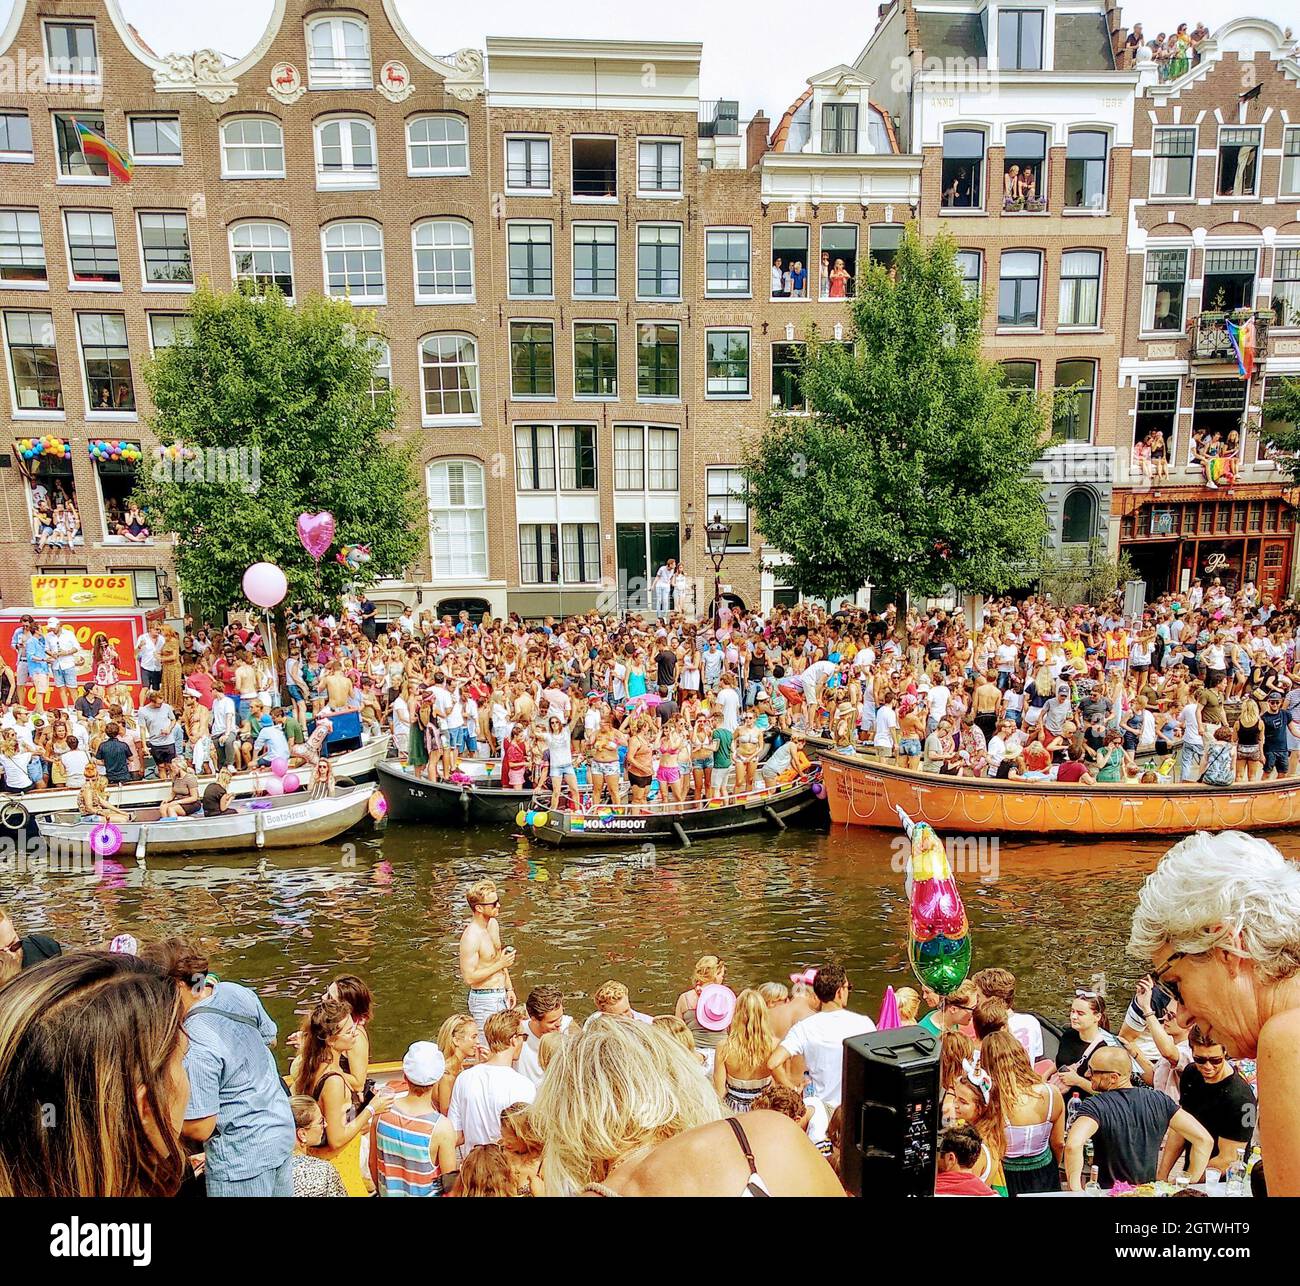 High Angle View Of Crowd On Boats In Canal With Buildings In Background During Stock Photo